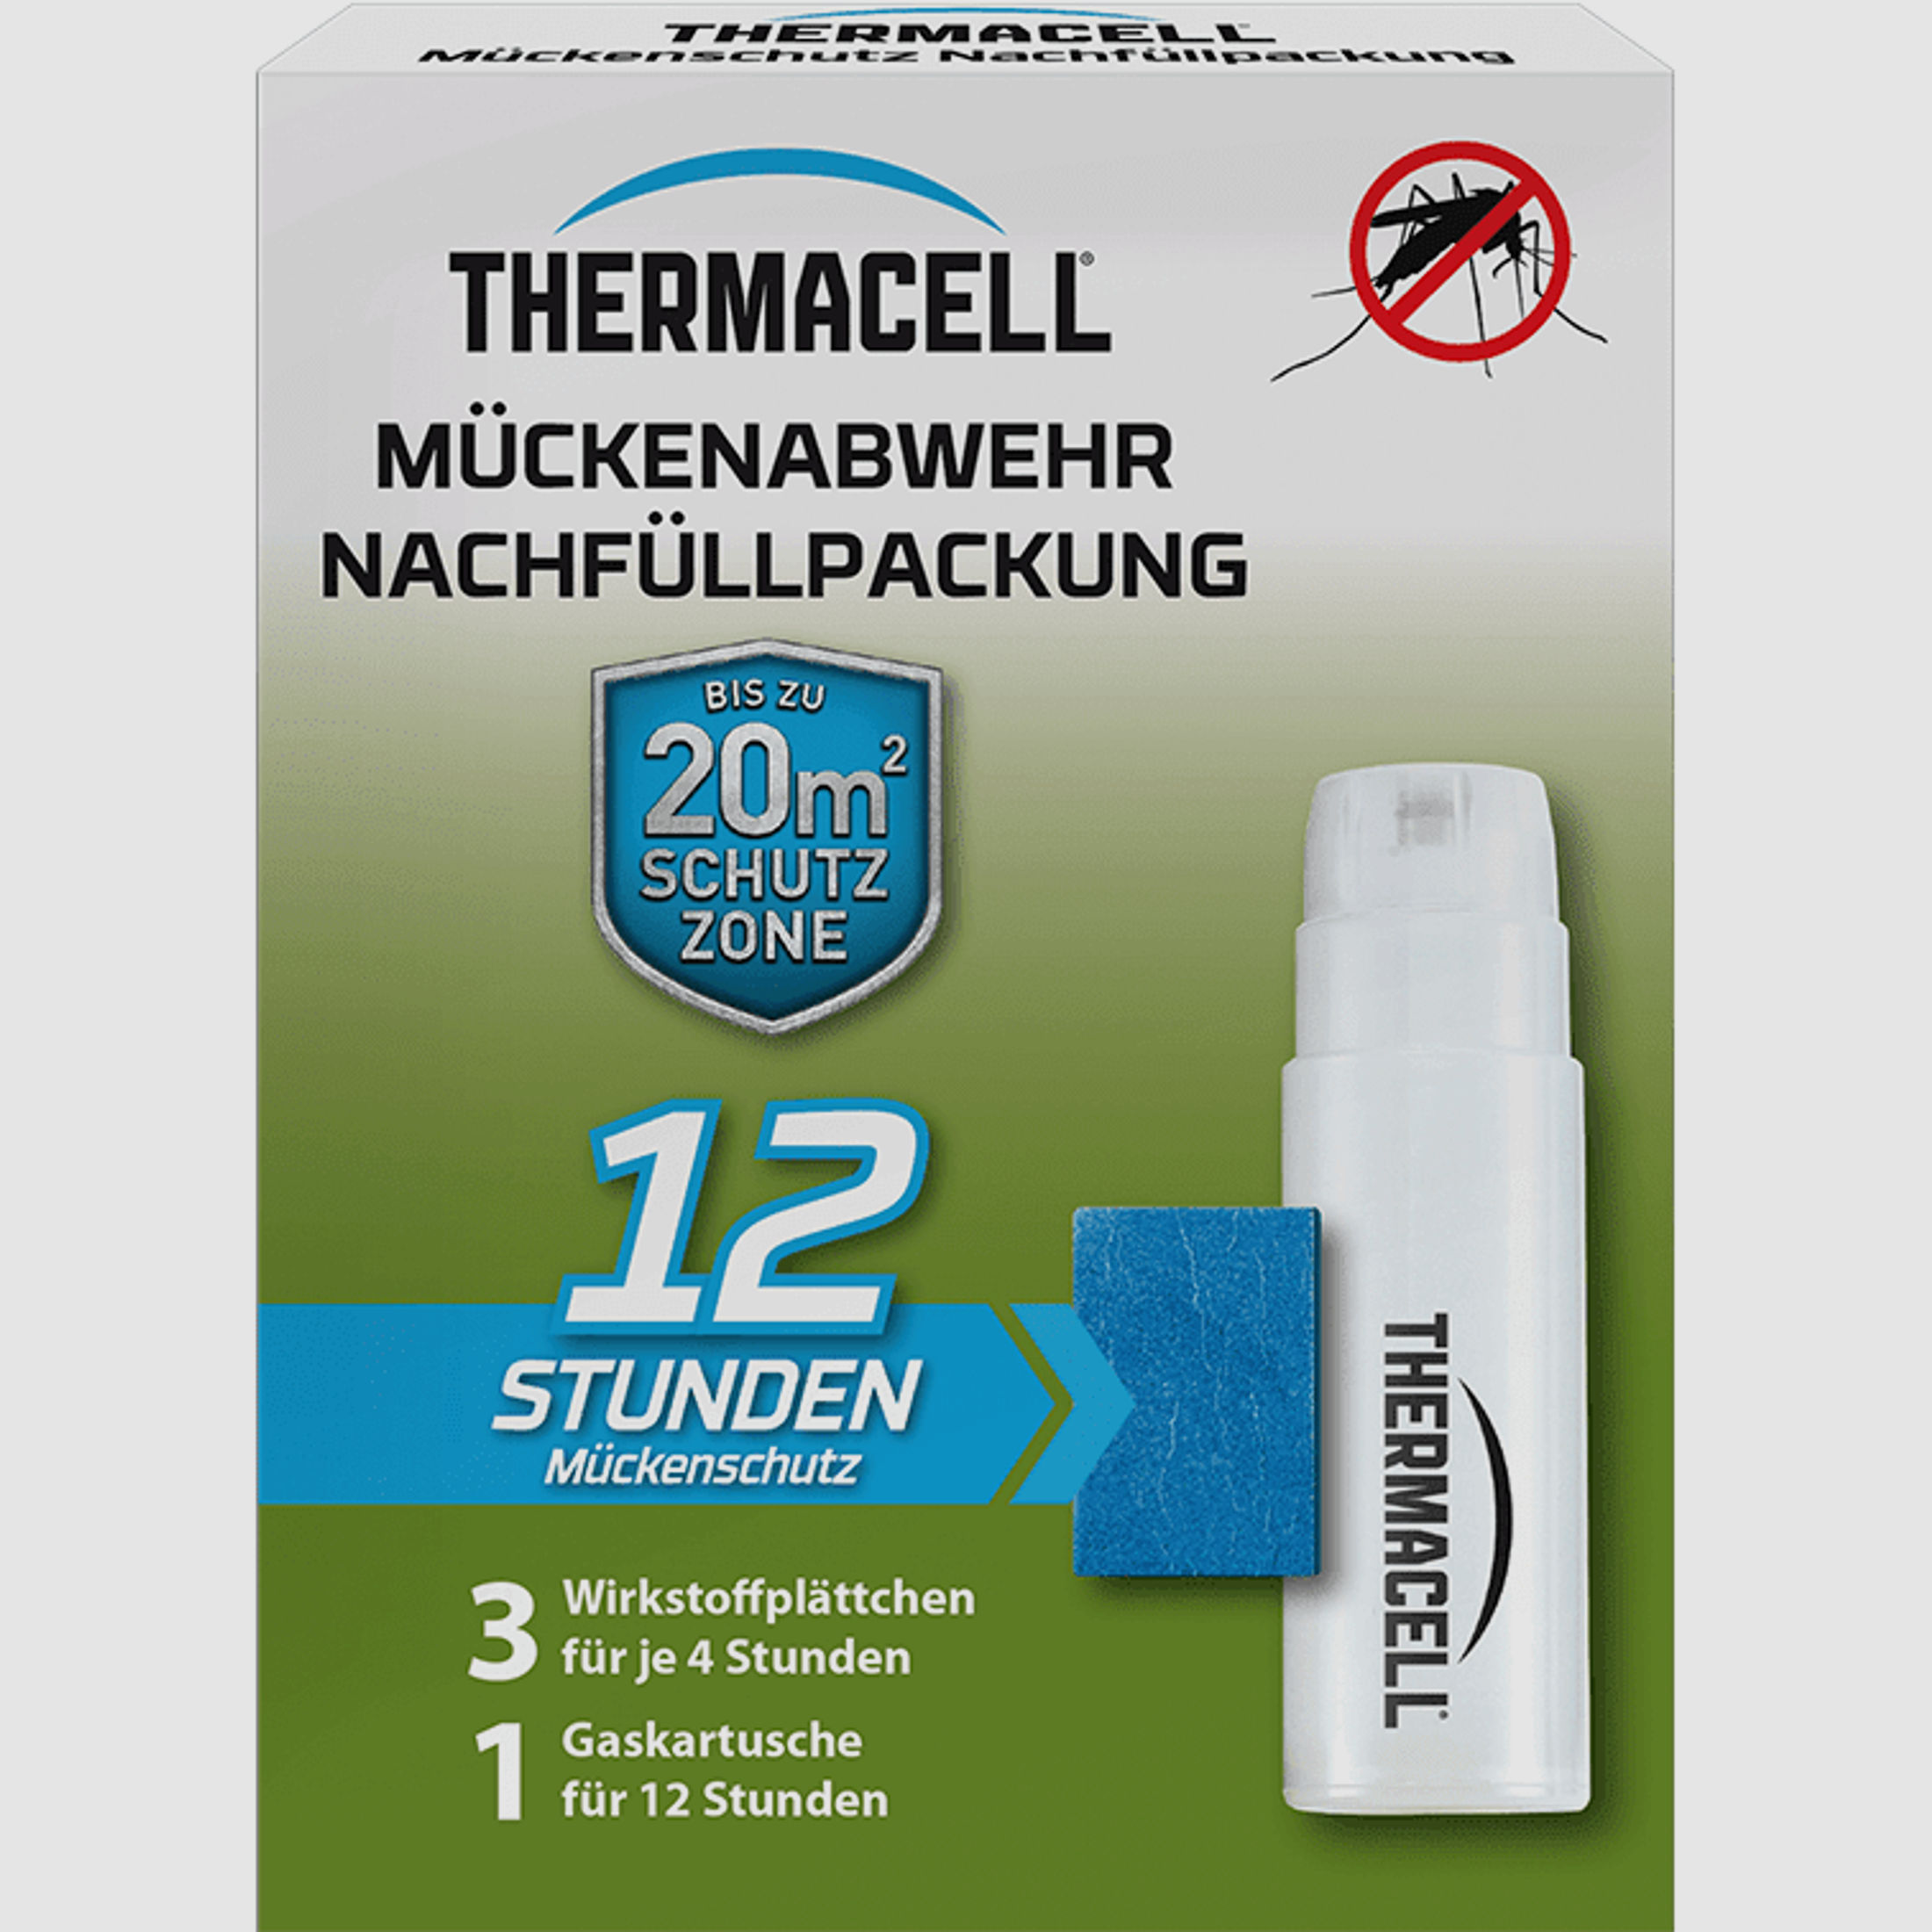 Thermacell R-1 Nachfüllpackung